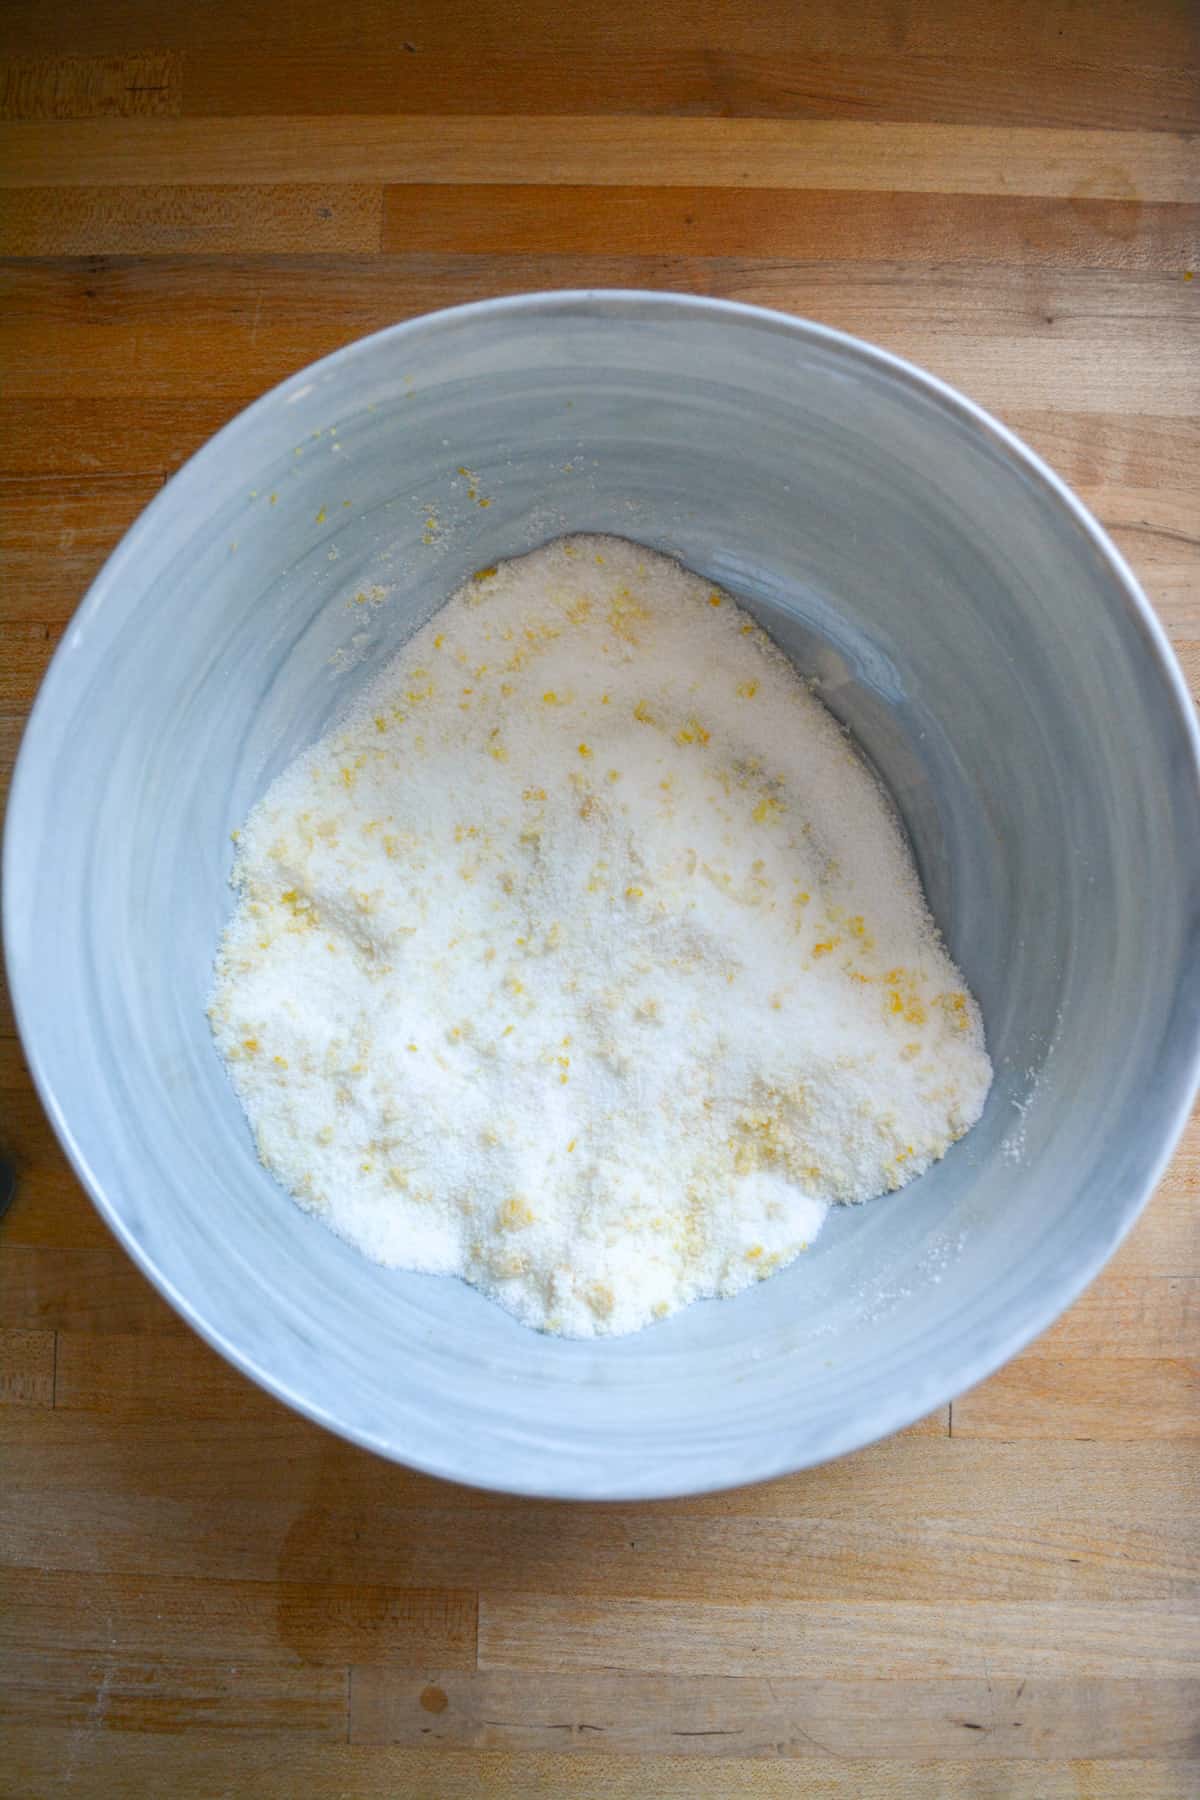 Sugar and lemon zest in a large mixing bowl.